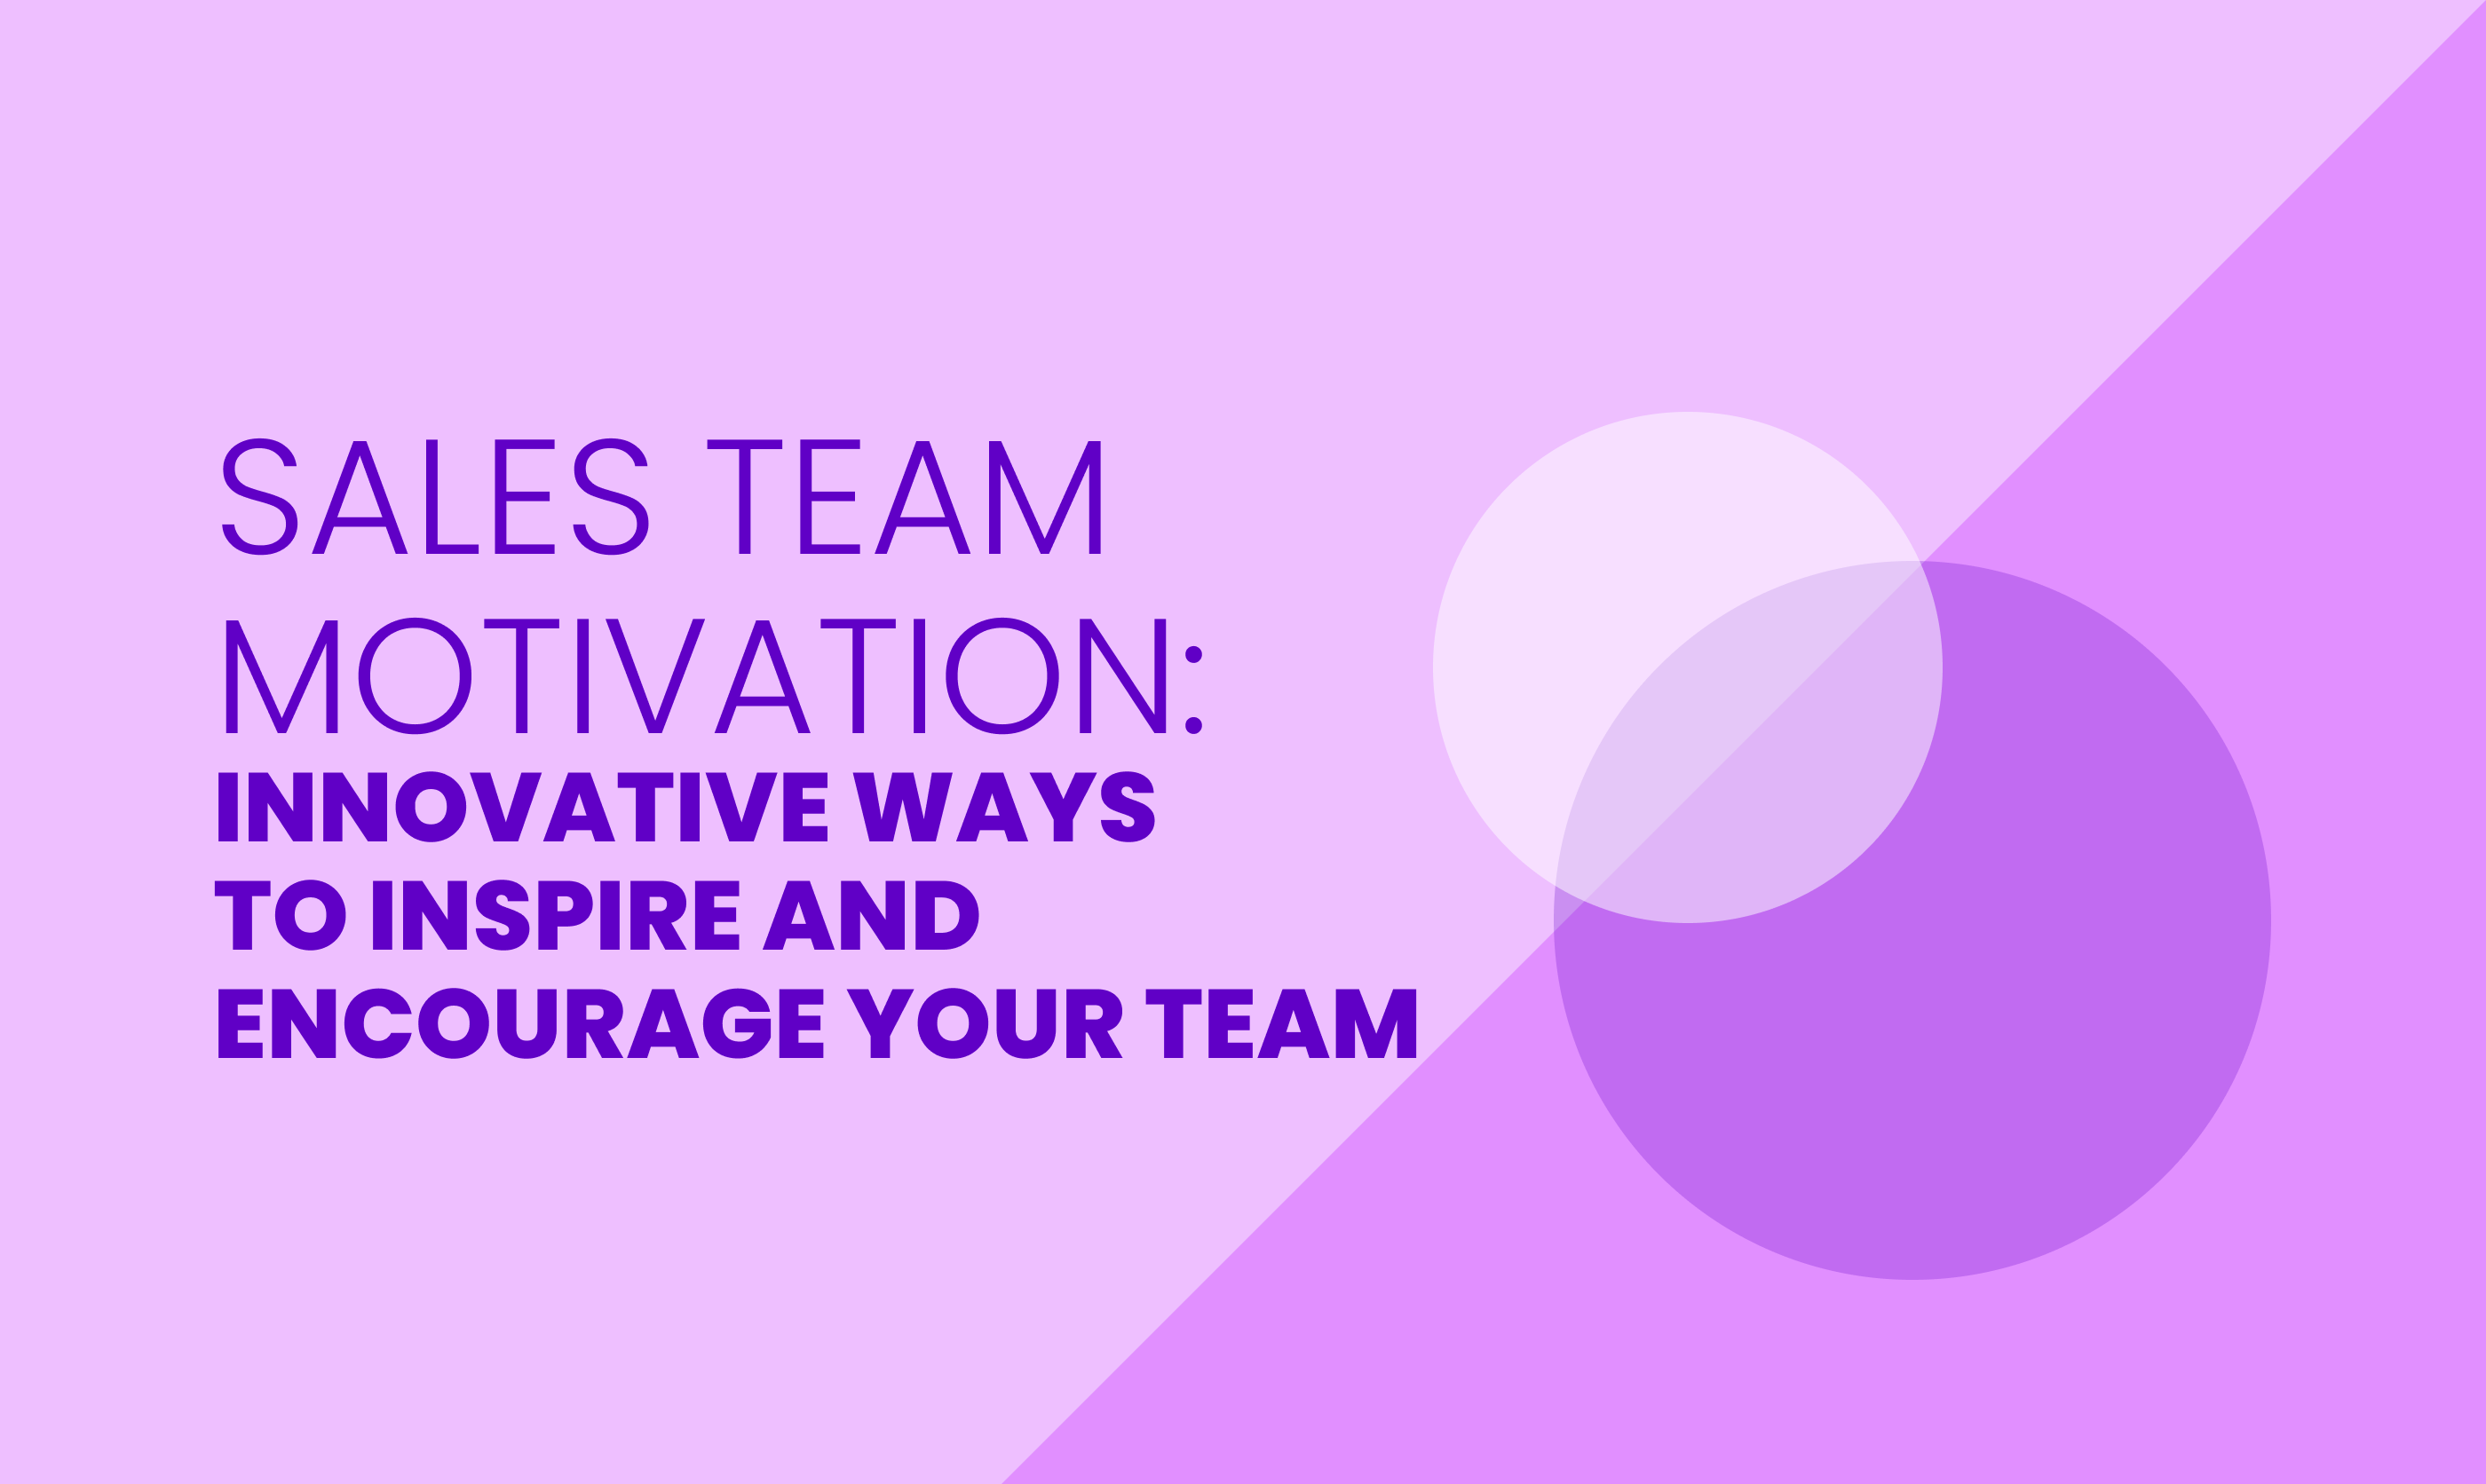 SALES TEAM MOTIVATION: INNOVATIVE WAYS  TO INSPIRE AND ENCOURAGE YOUR TEAM